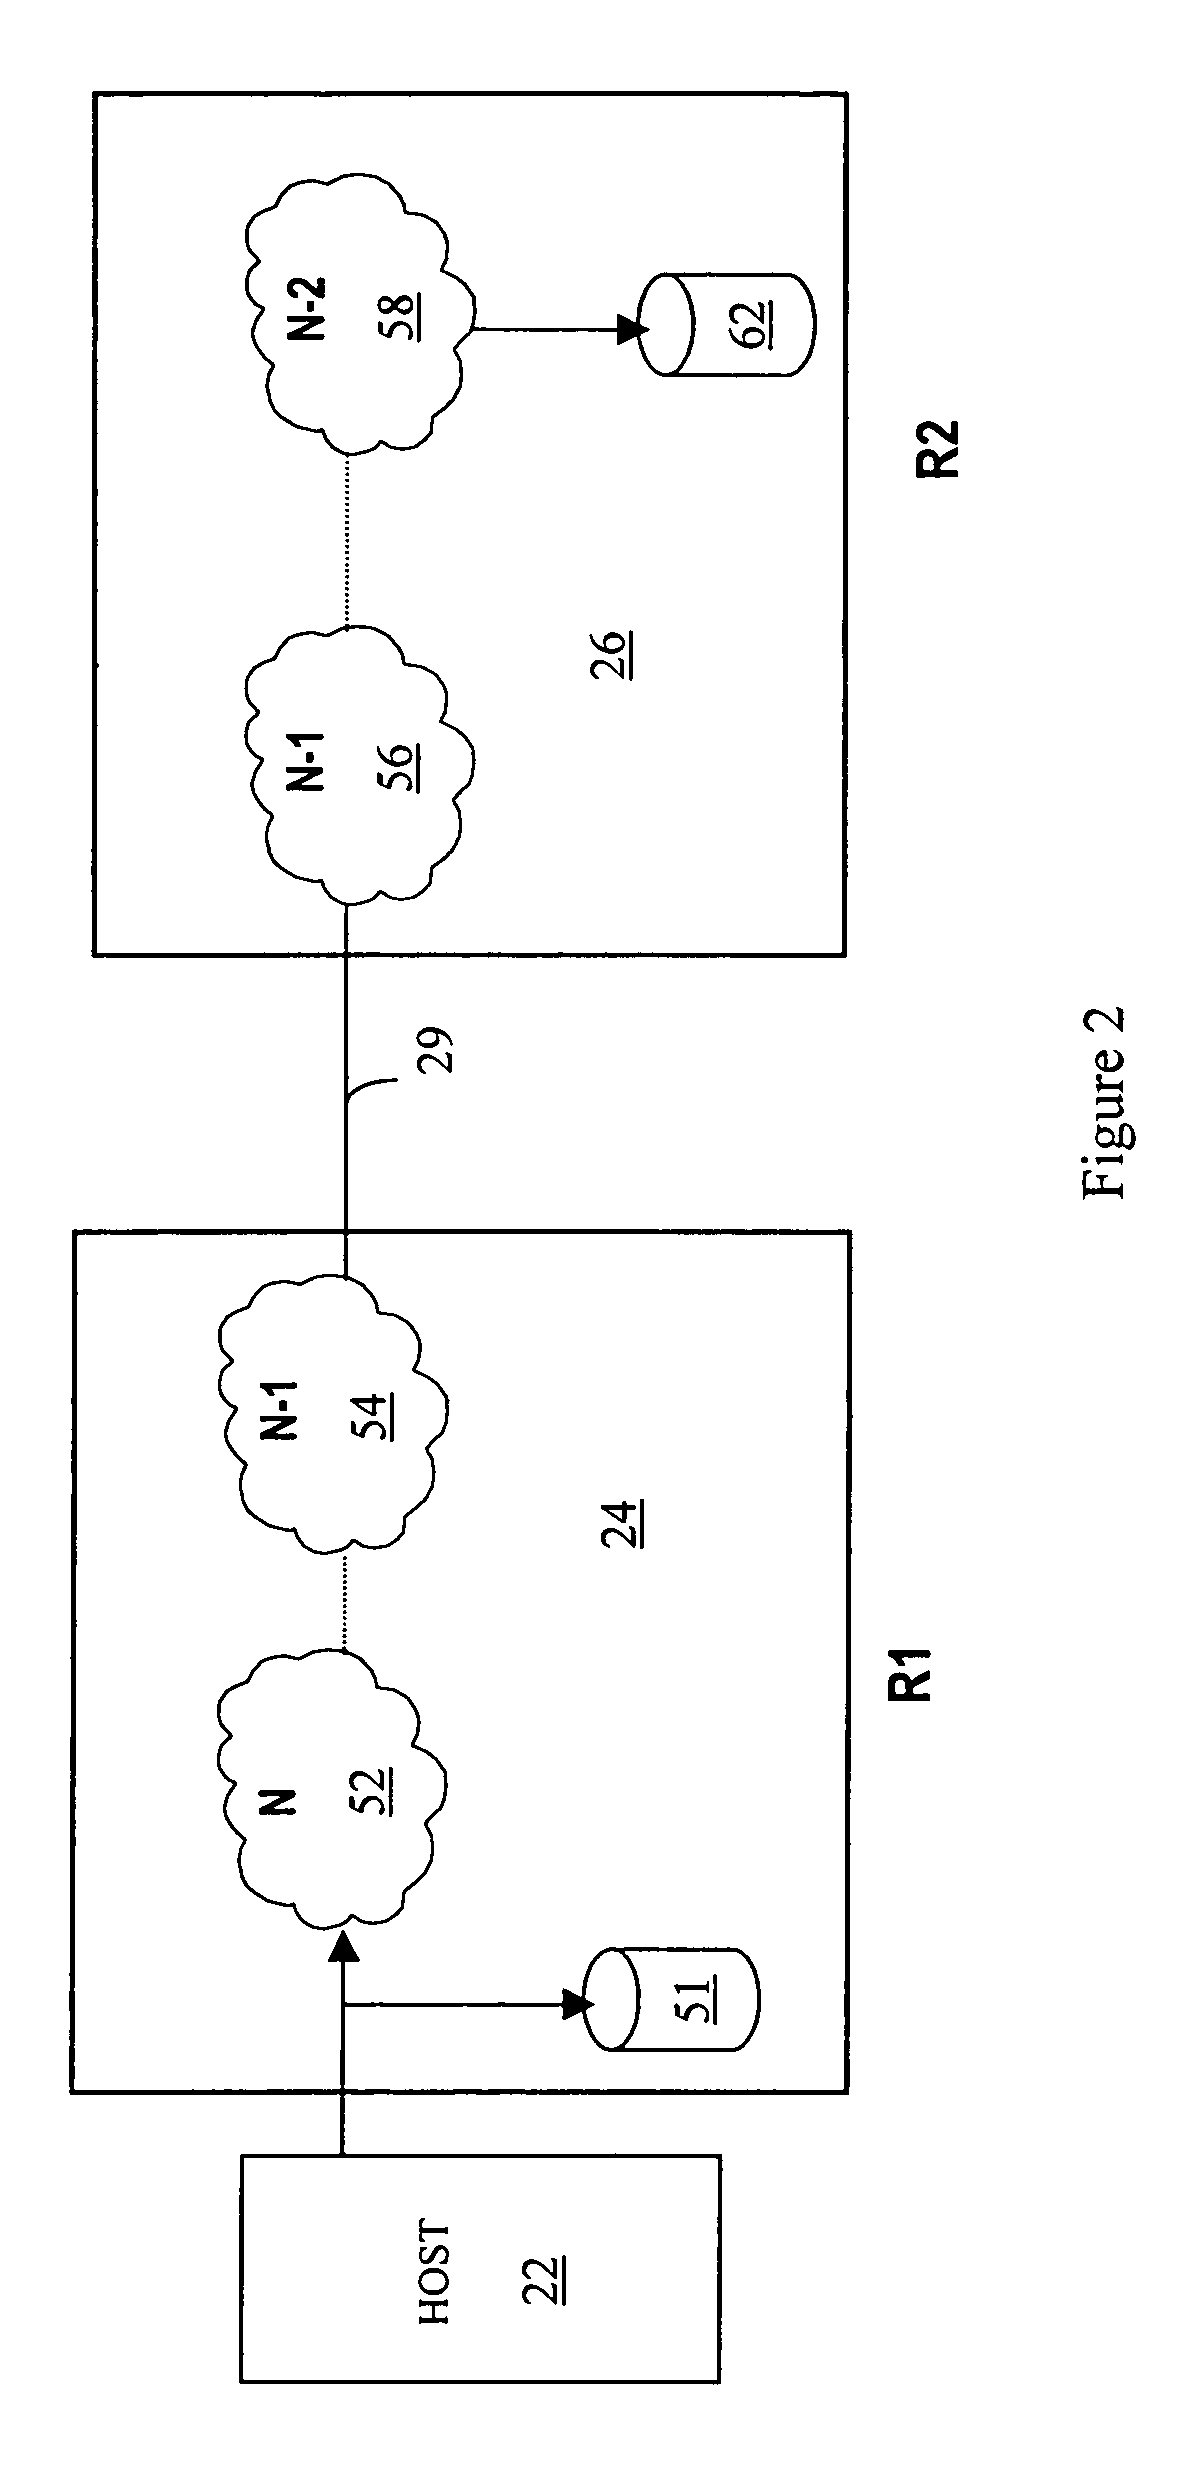 Data recovery for virtual ordered writes for multiple storage devices